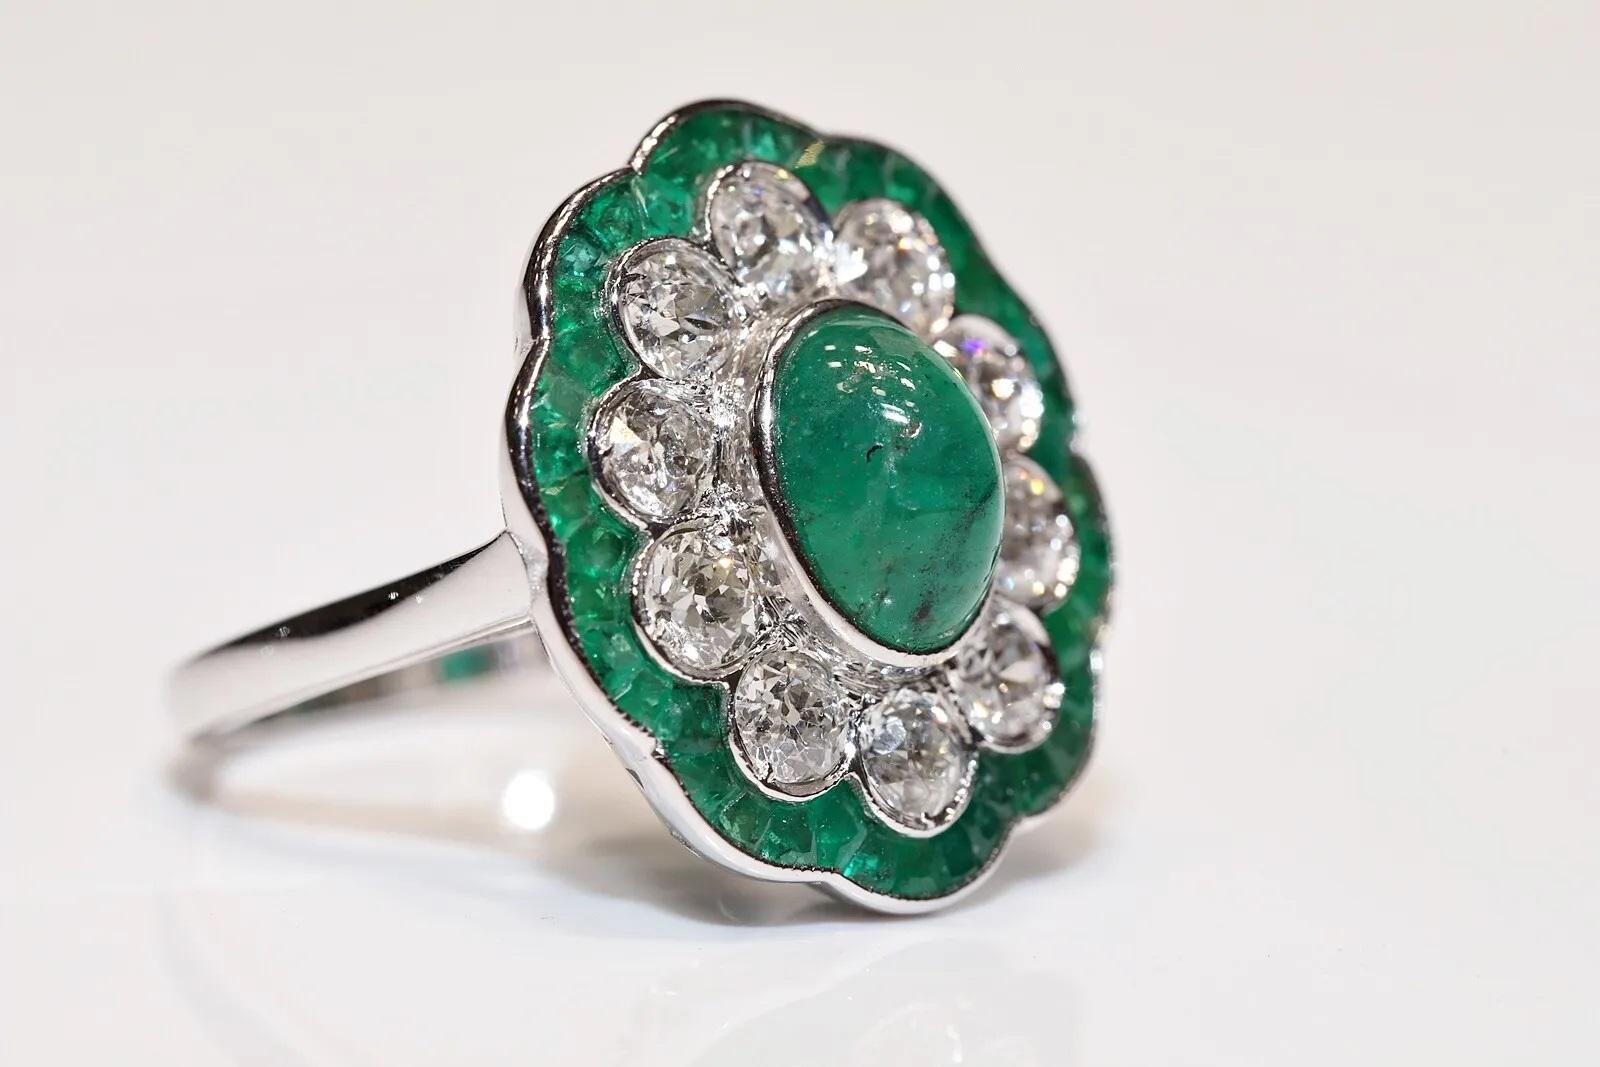 In very good condition.
Total weight is 7.8 grams.
Totally is diamond 1.62 carat.
The diamond is has G-H color and vvs-vs.
Totally is emerald 4 carat...
Ring size is US 6.8 (We offer free resizing)
We can make any size.
Box is not included.
Please